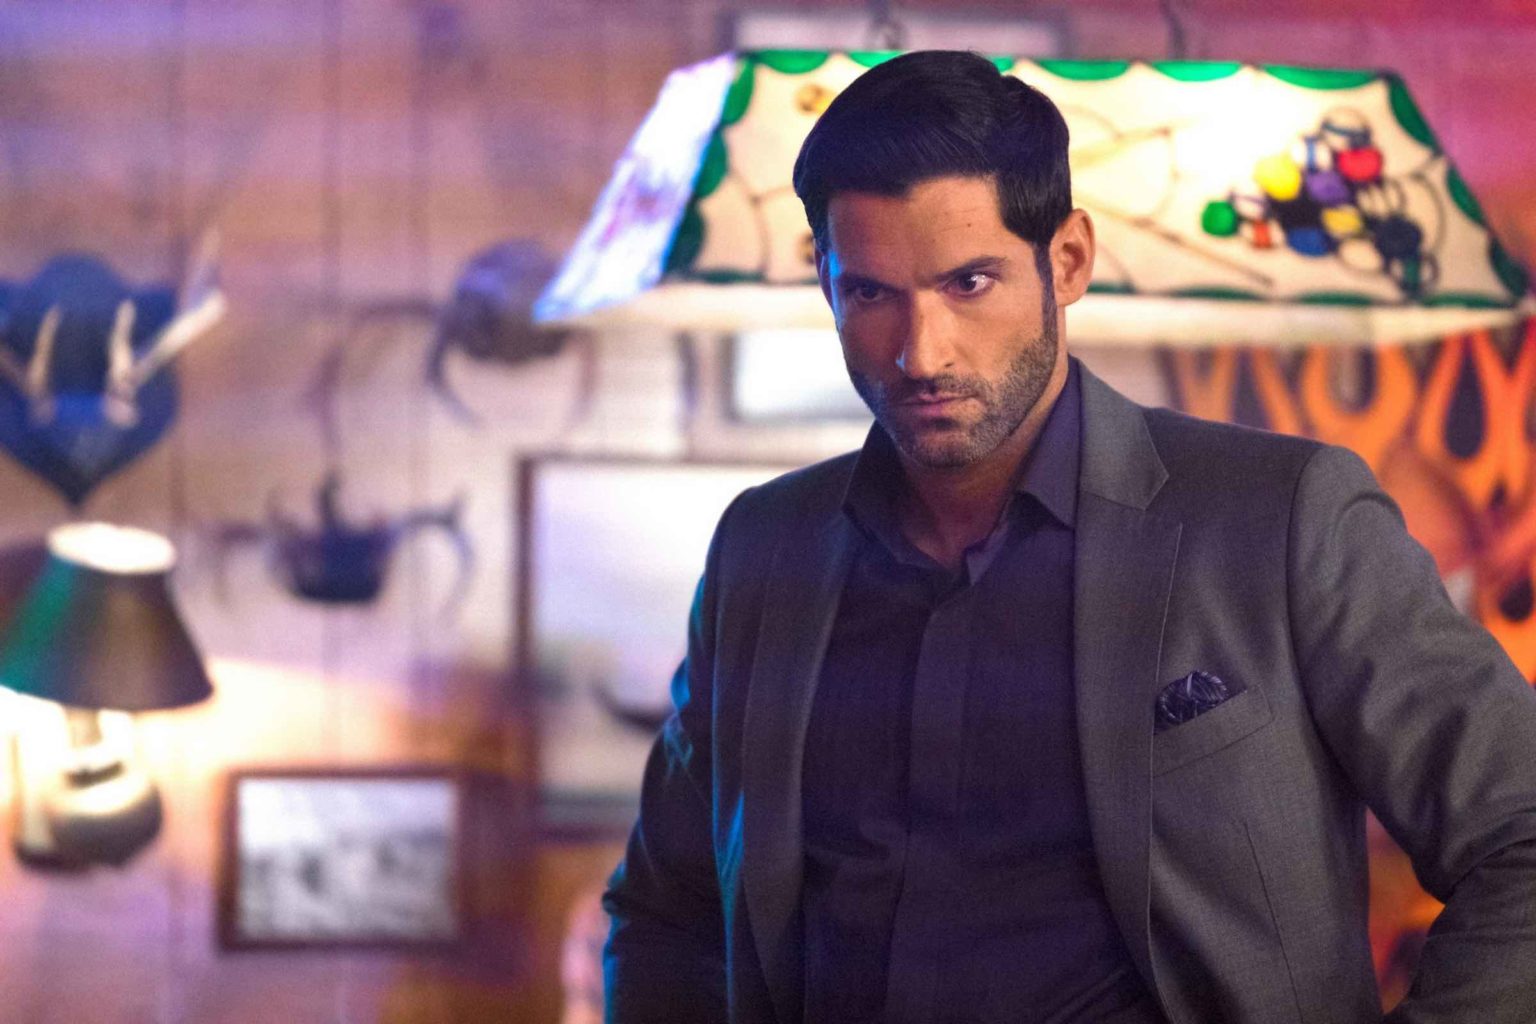 Netflix's 'Lucifer' fans have suffered from the news that the series will end with season five. Now there's word 'Lucifer' may get a season 6 after all.